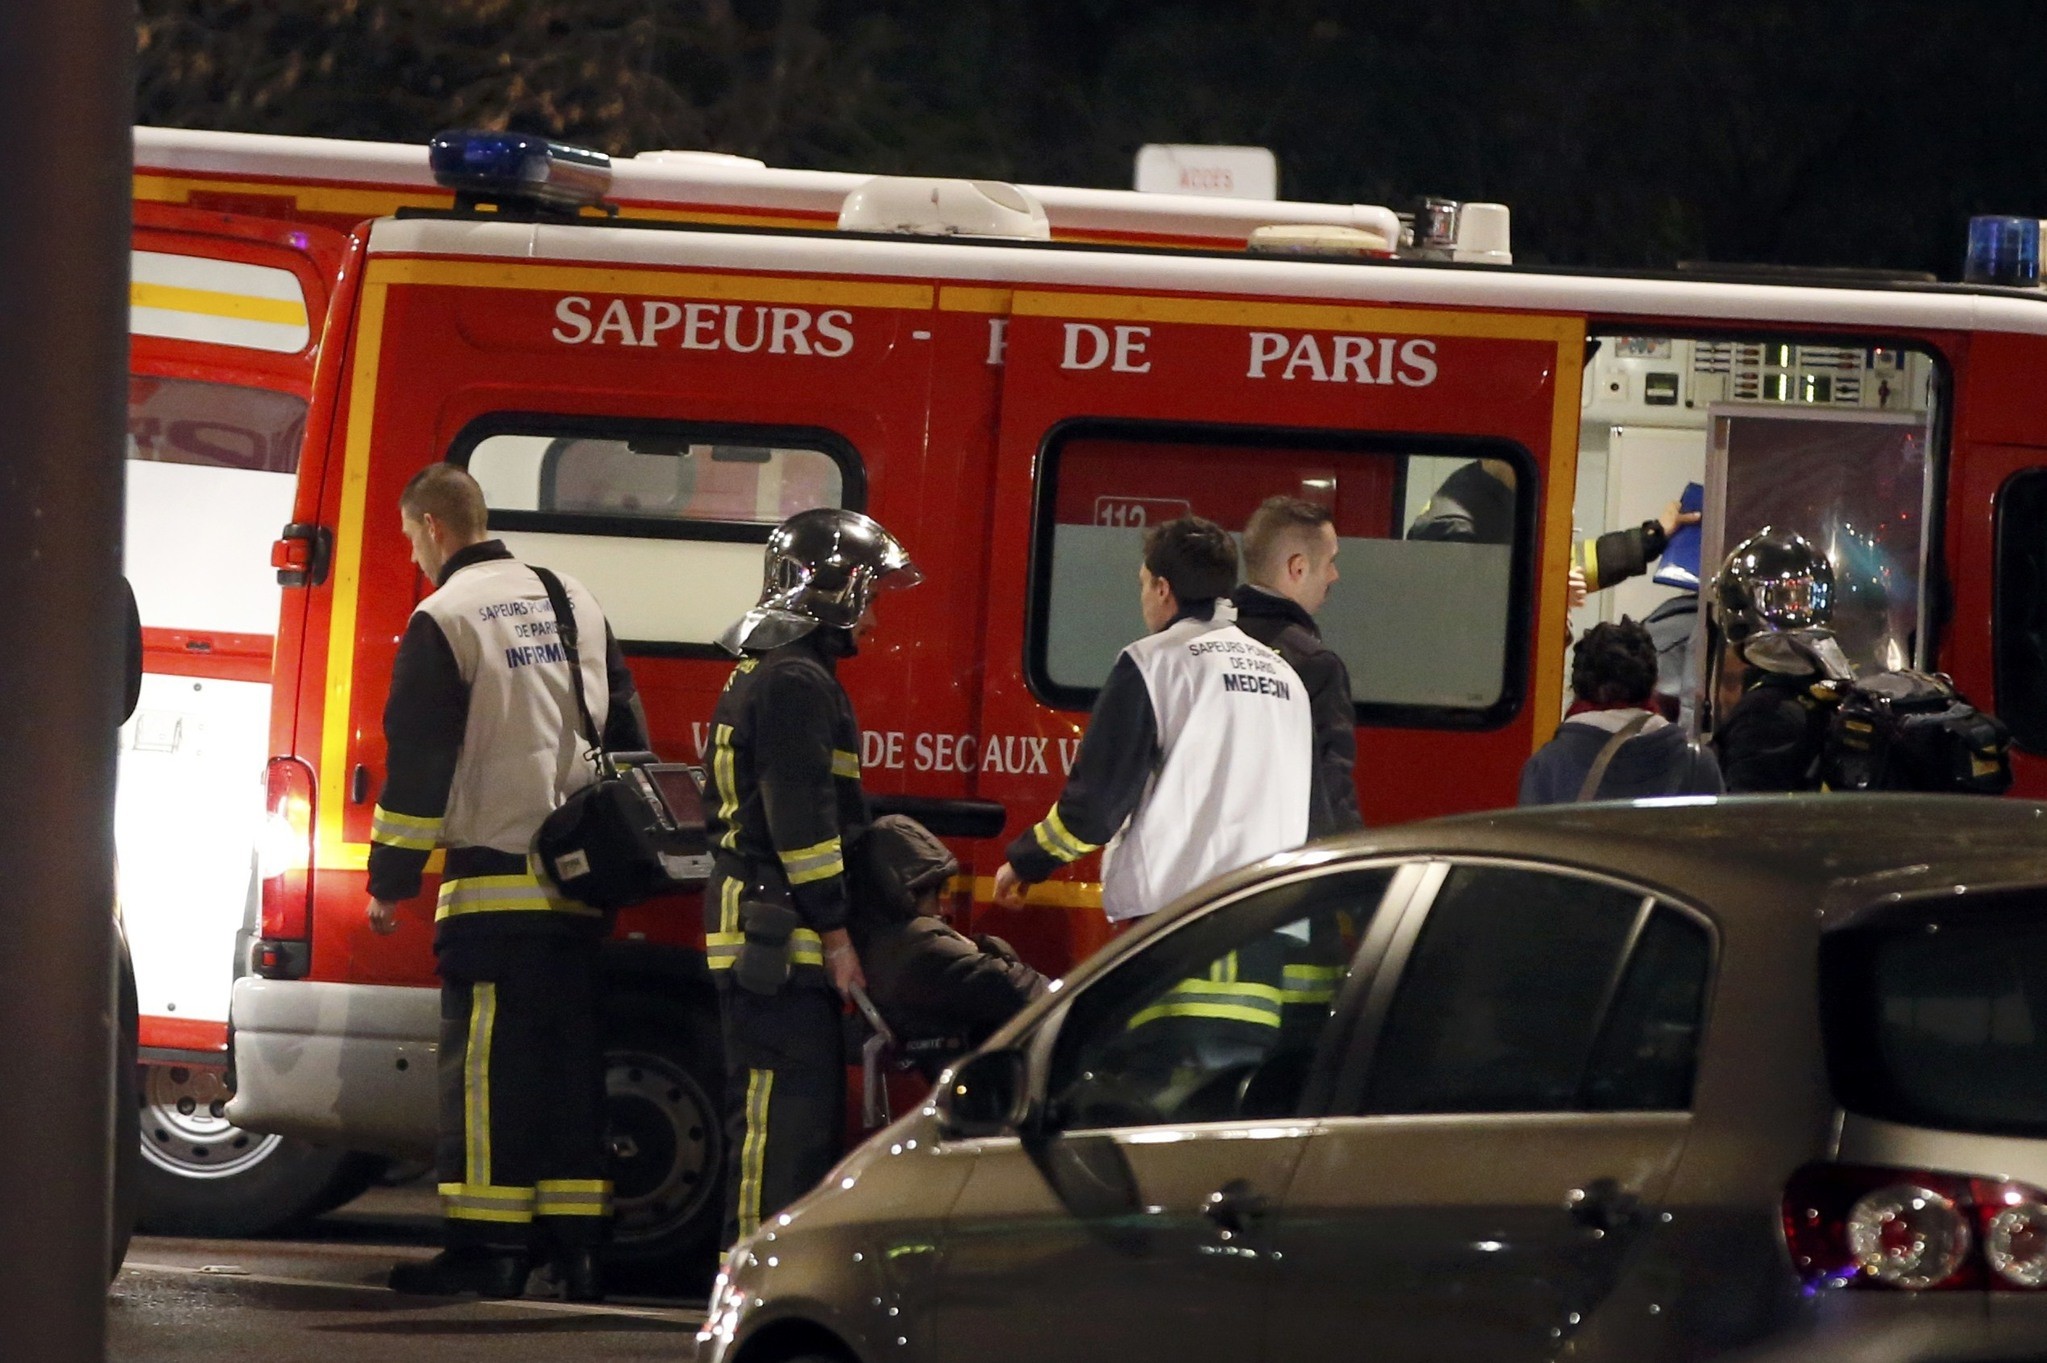 French firemen and doctors tend to a person who was one of six people in a travel agency when an armed man entered in what appears to be a robbery. (REUTERS Photo)